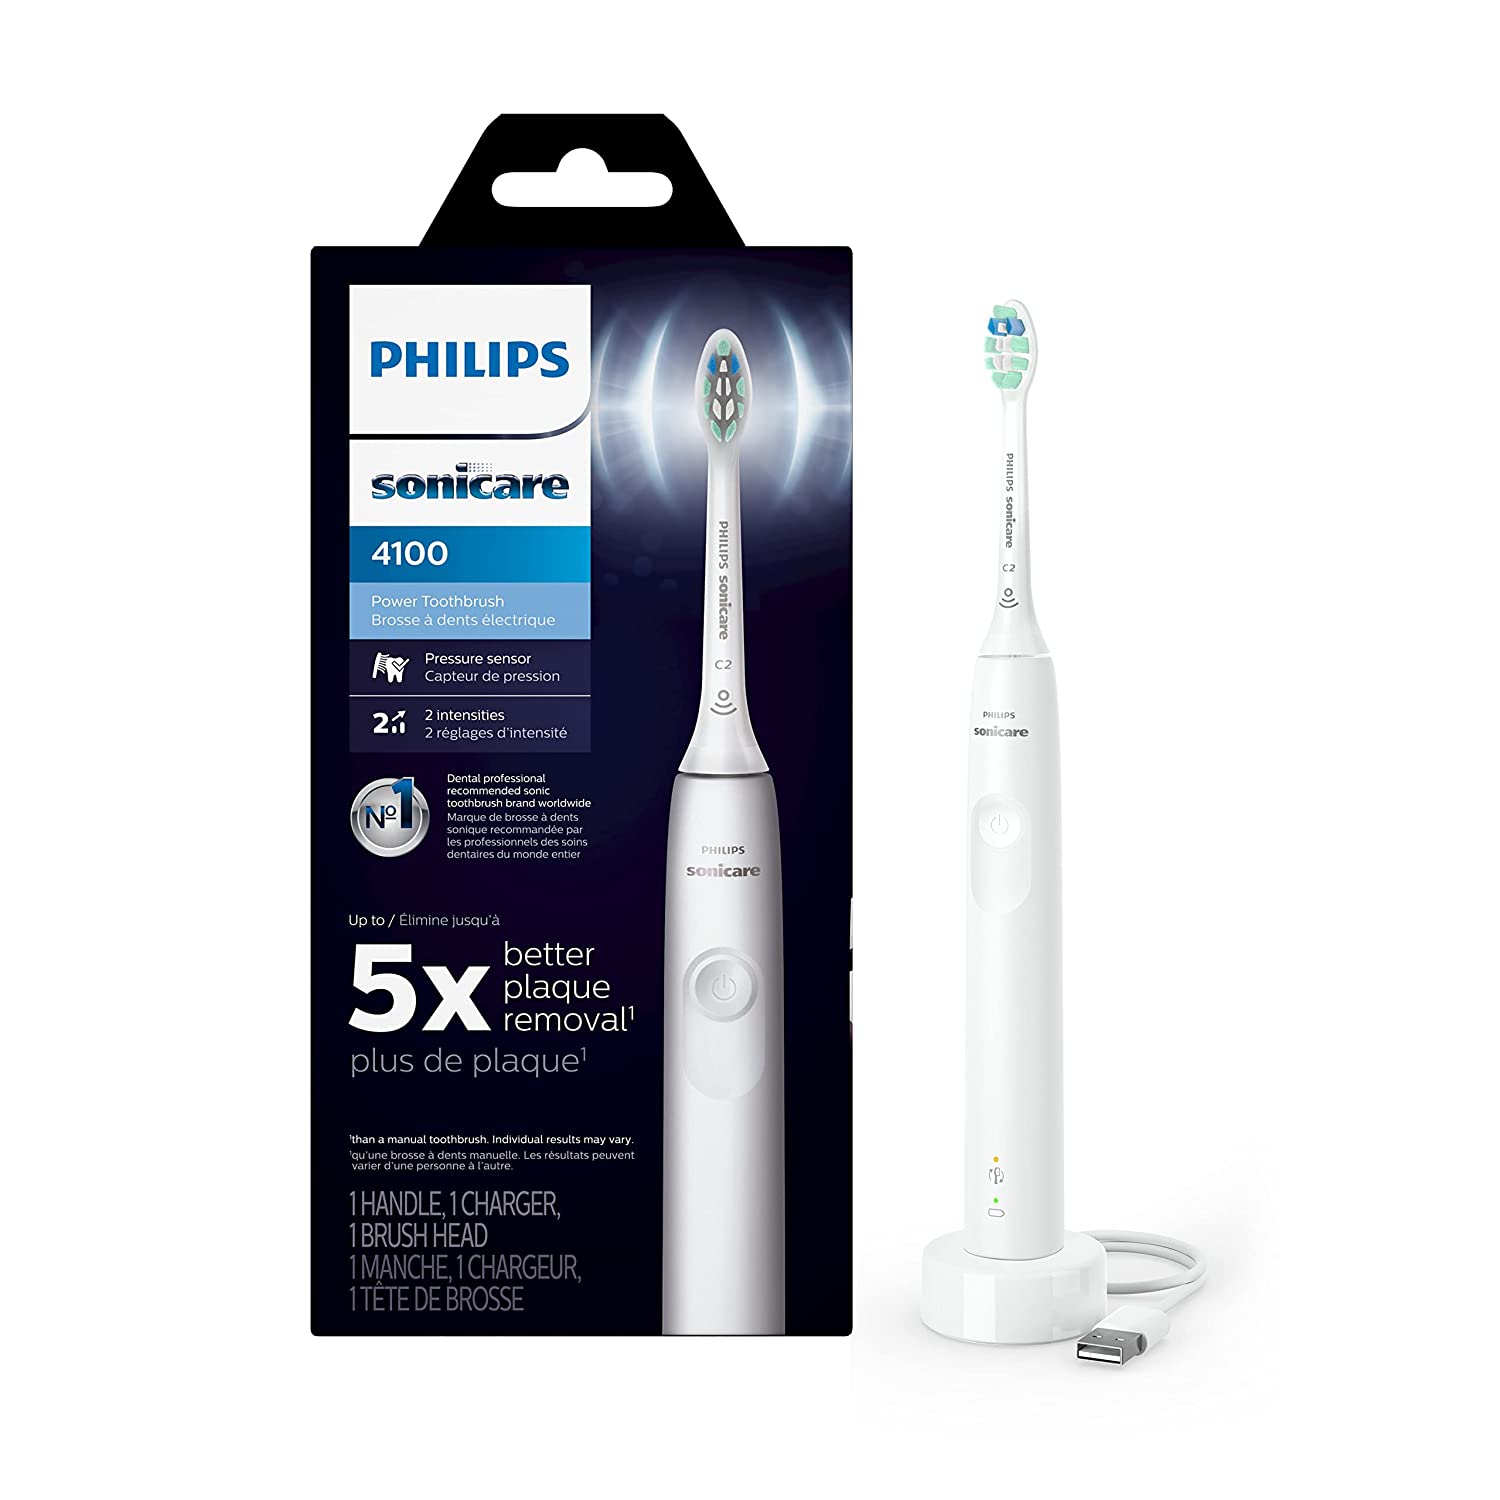 Philips Sonicare 4100 Rechargeable Electric Toothbrush with Pressure Sensor - White - HX3681/23 - Pro-Distributing